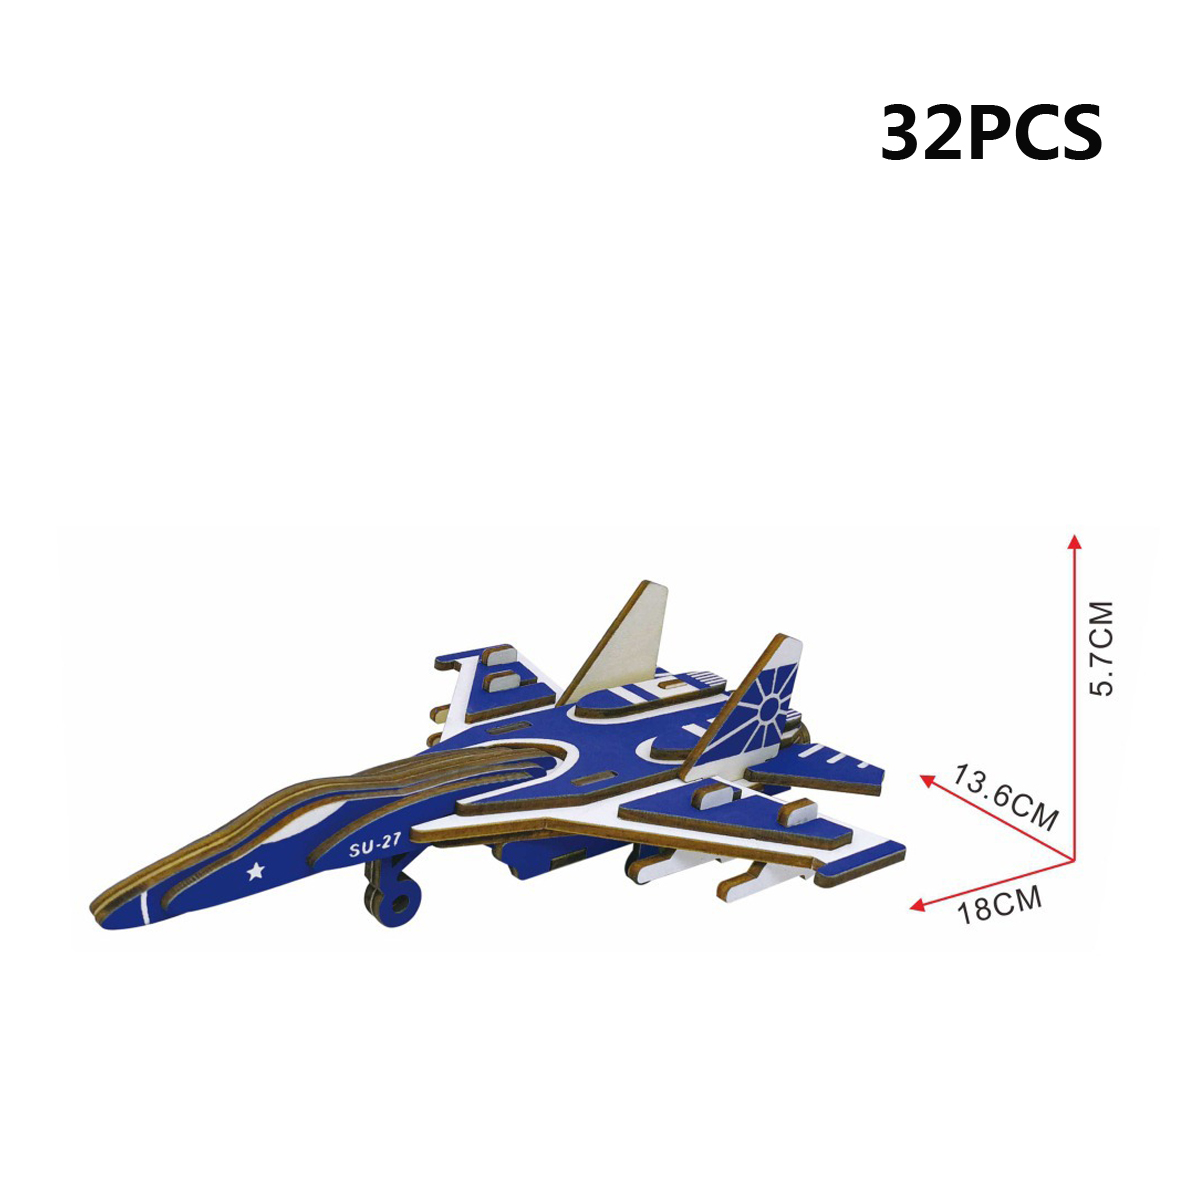 3D-Woodcraft-Assembly-Western-Fighter-Series-Kit-Jigsaw-Puzzle-Decoration-Toy-Model-for-Kids-Gift-1632732-8